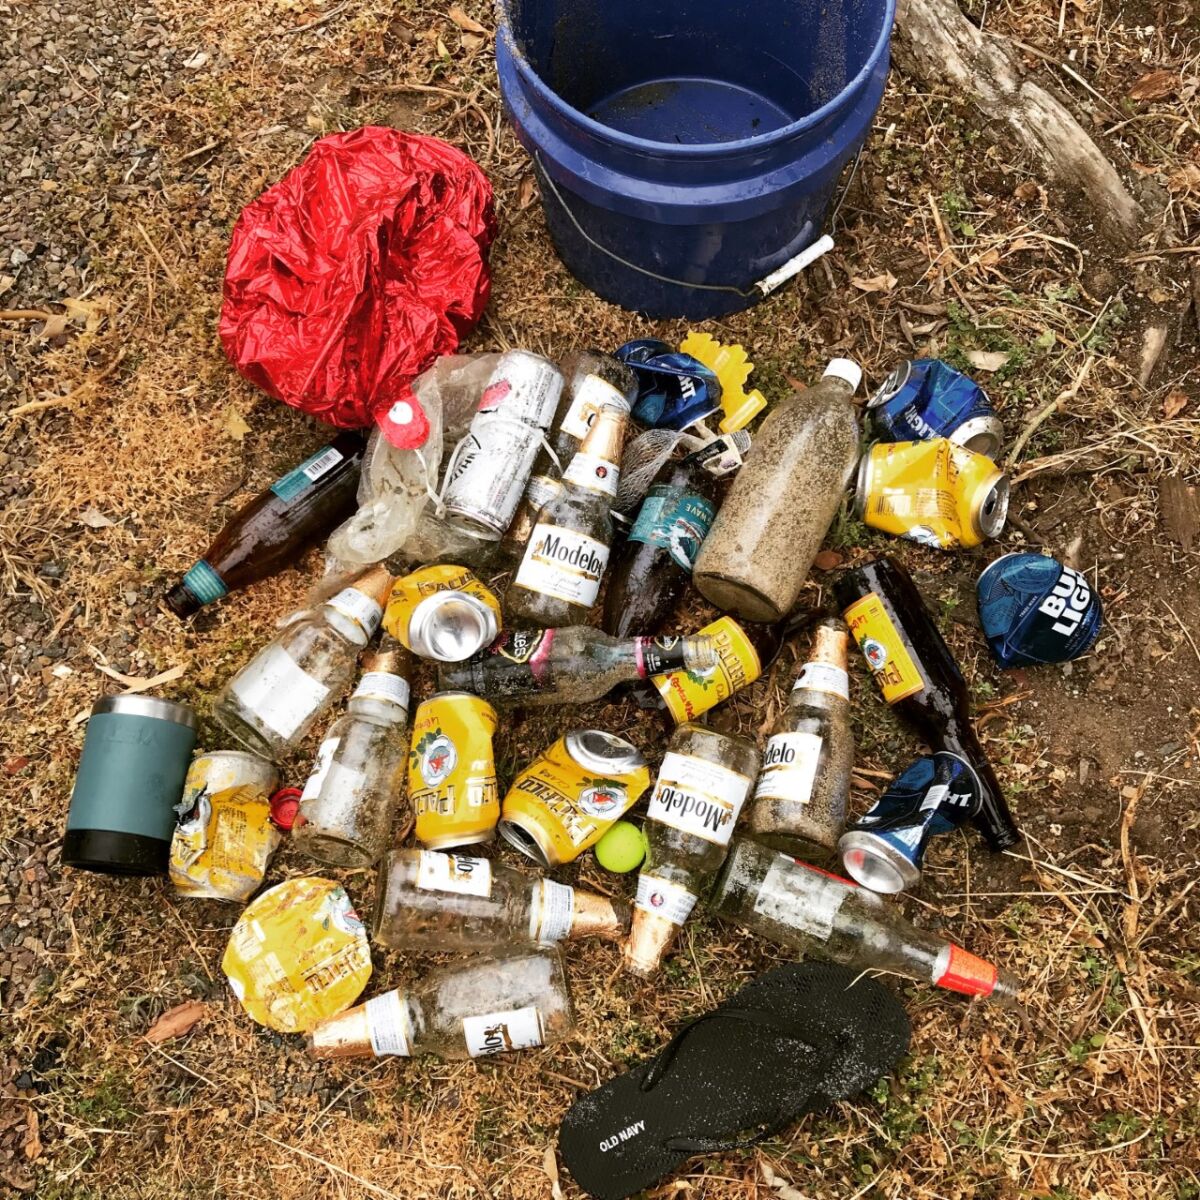 An influx of trash, including many cans and bottles of alcohol, has been found in the Sunset Cliffs area.